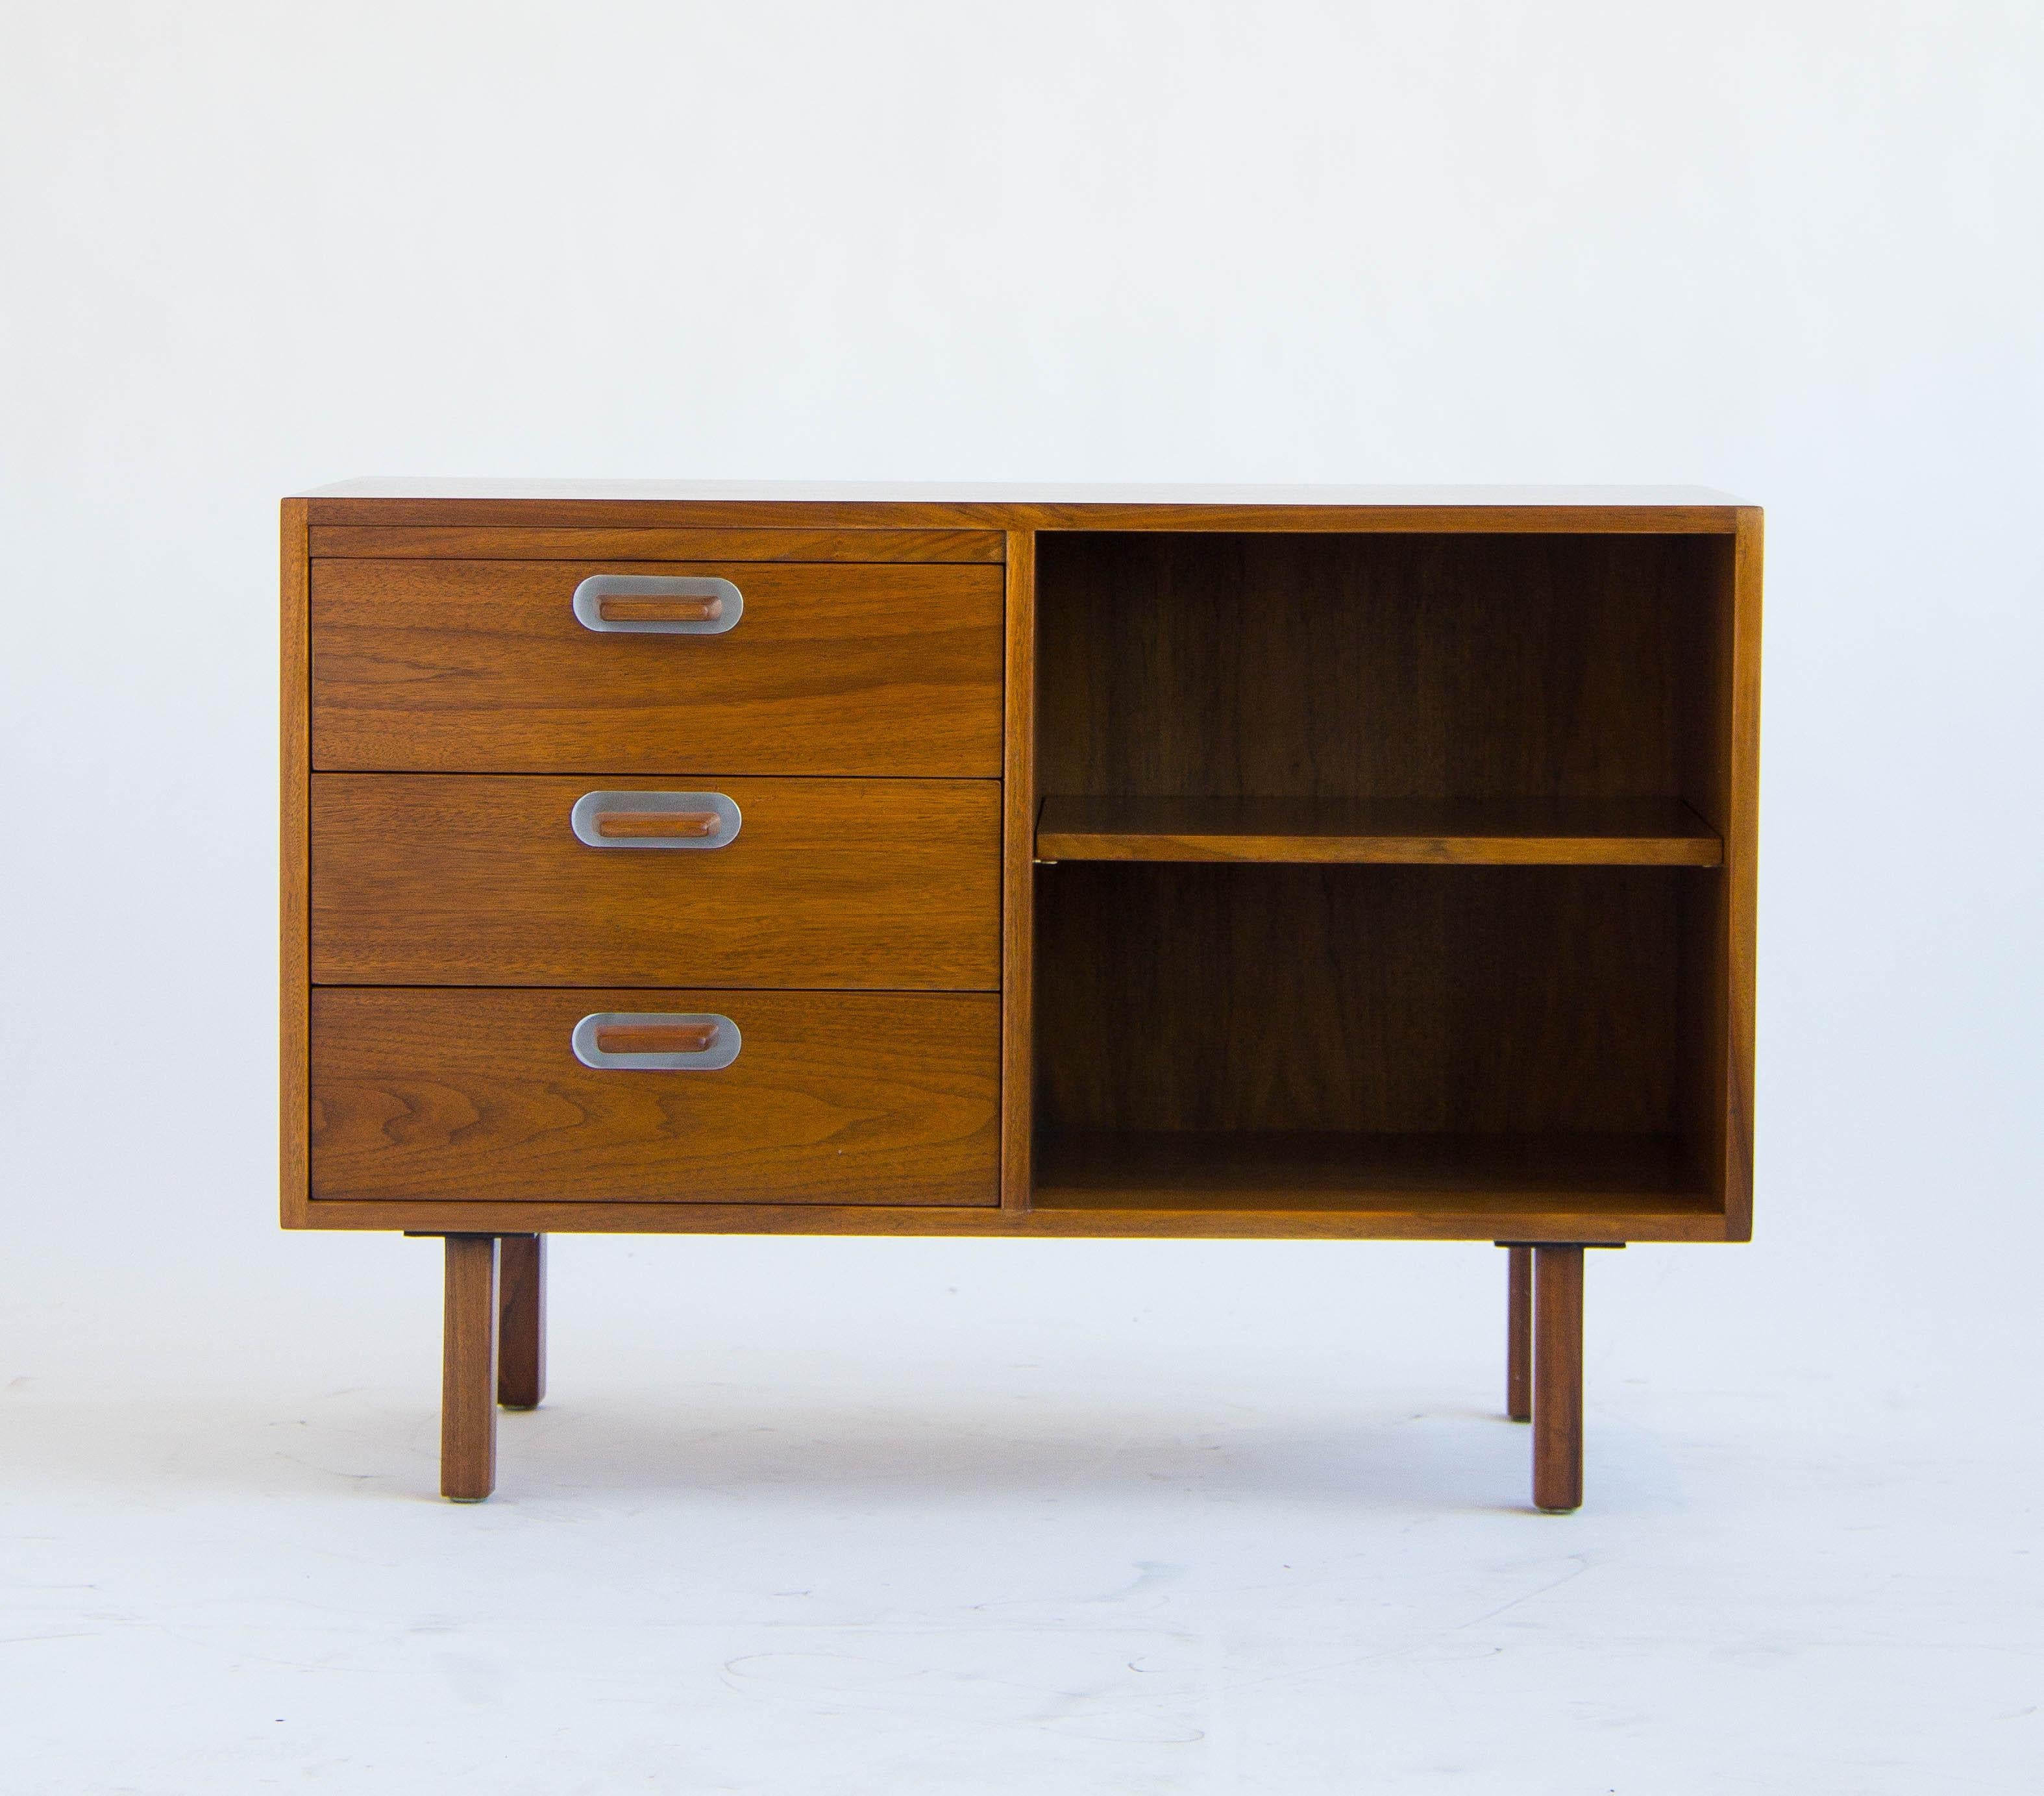 This compact credenza by Jens Risom, is made of solid walnut and finished with polished aluminum details. Left side has three drawers and the right side is open with two shelves. The finished back allows for placement anywhere. Retains Jens Risom